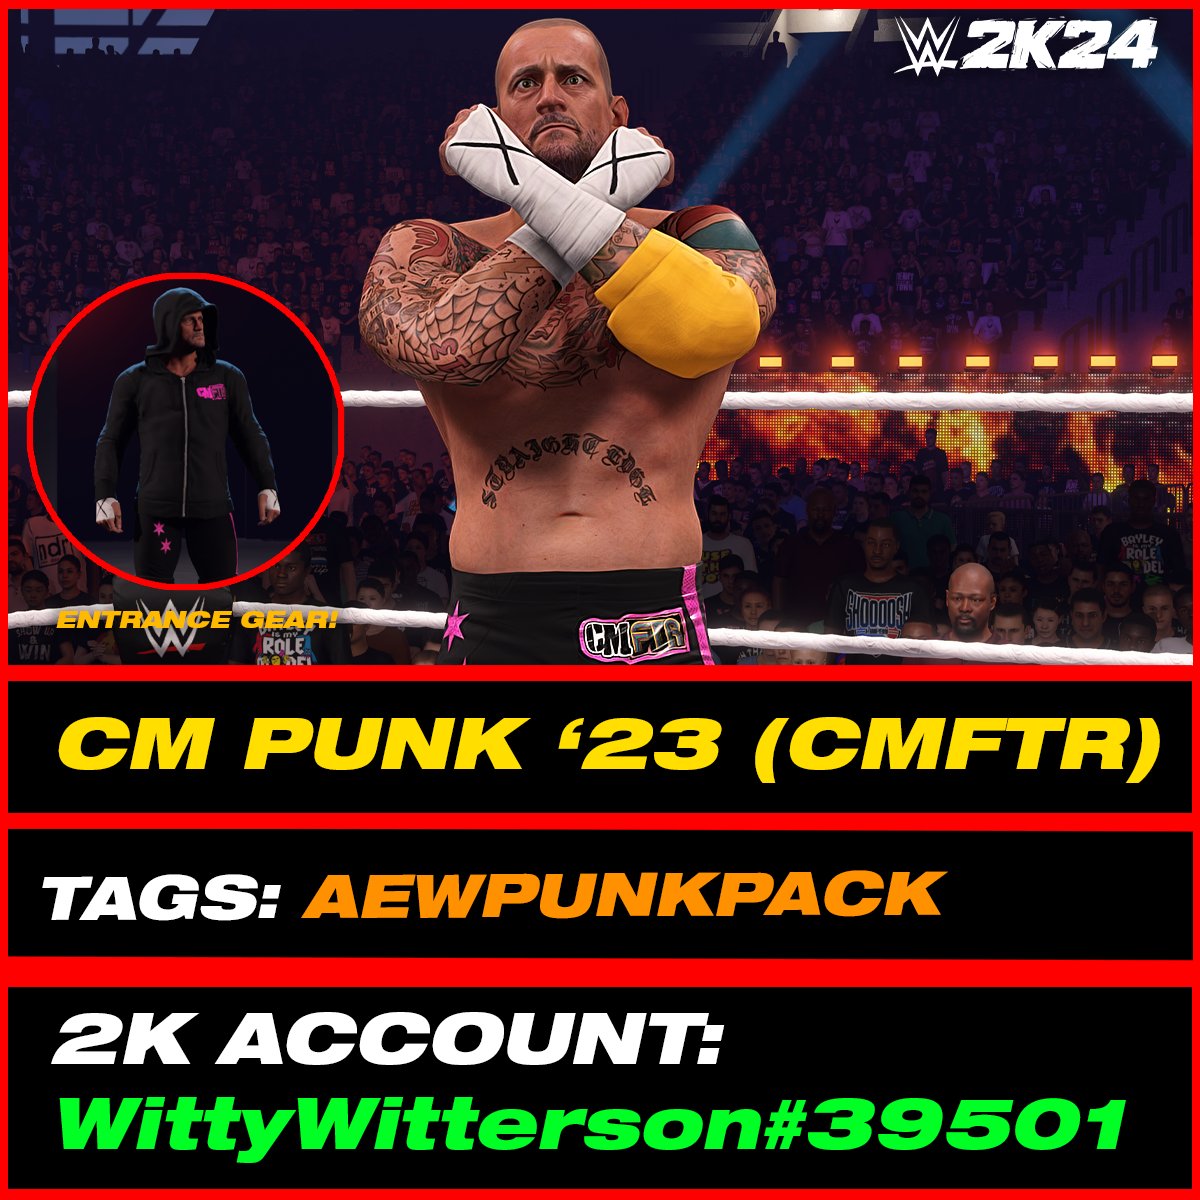 CM Punk CMFTR '23 (In-Game Edit) is uploaded onto Community Creations #WWE2K24 •Tags: AEWPUNKPACK, WITTY226, PETCHY •Collab: @PETCHYcreations •Attire: @Kamillion2k INCLUDES: • 'CM Punk' Call Name • Commentary • Accurate Tattoos • Automatic Alt Attire for CM Punk